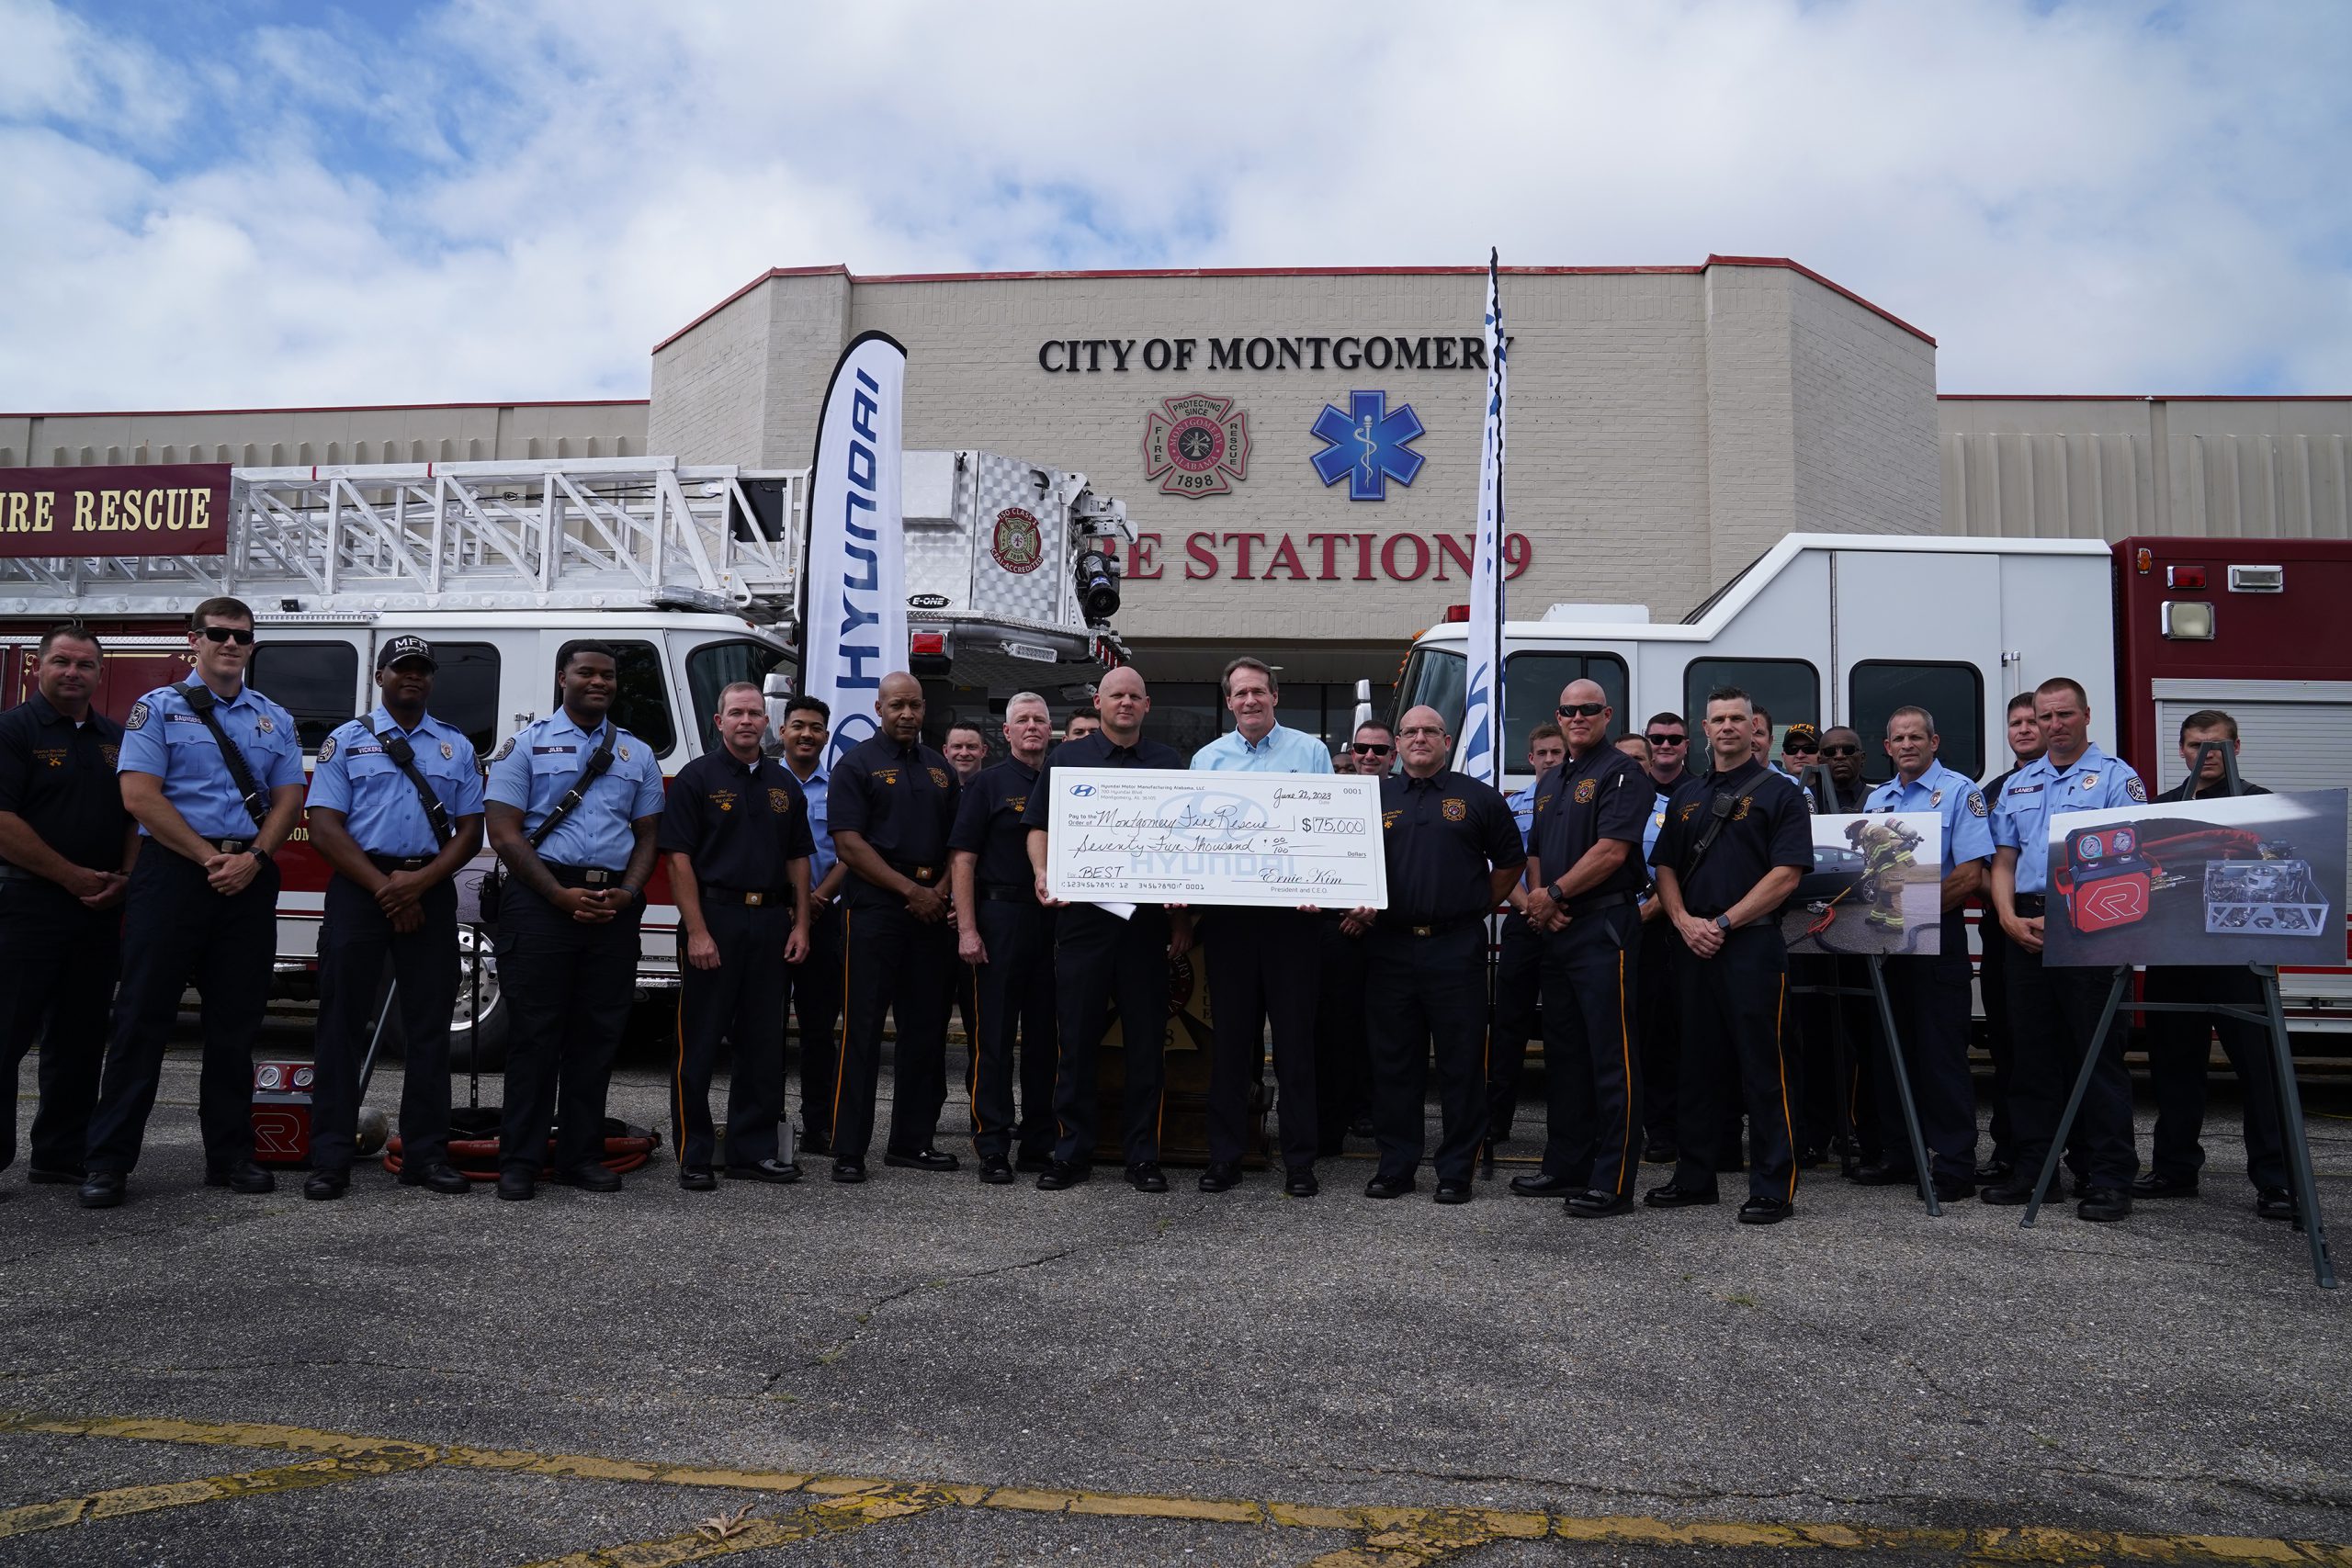 HMMA DONATES $75,000 TO MONTGOMERY FIRE RESCUE FOR ELECTRIC VEHICLE BATTERY FIRE EXTINGUISHING SYSTEMS